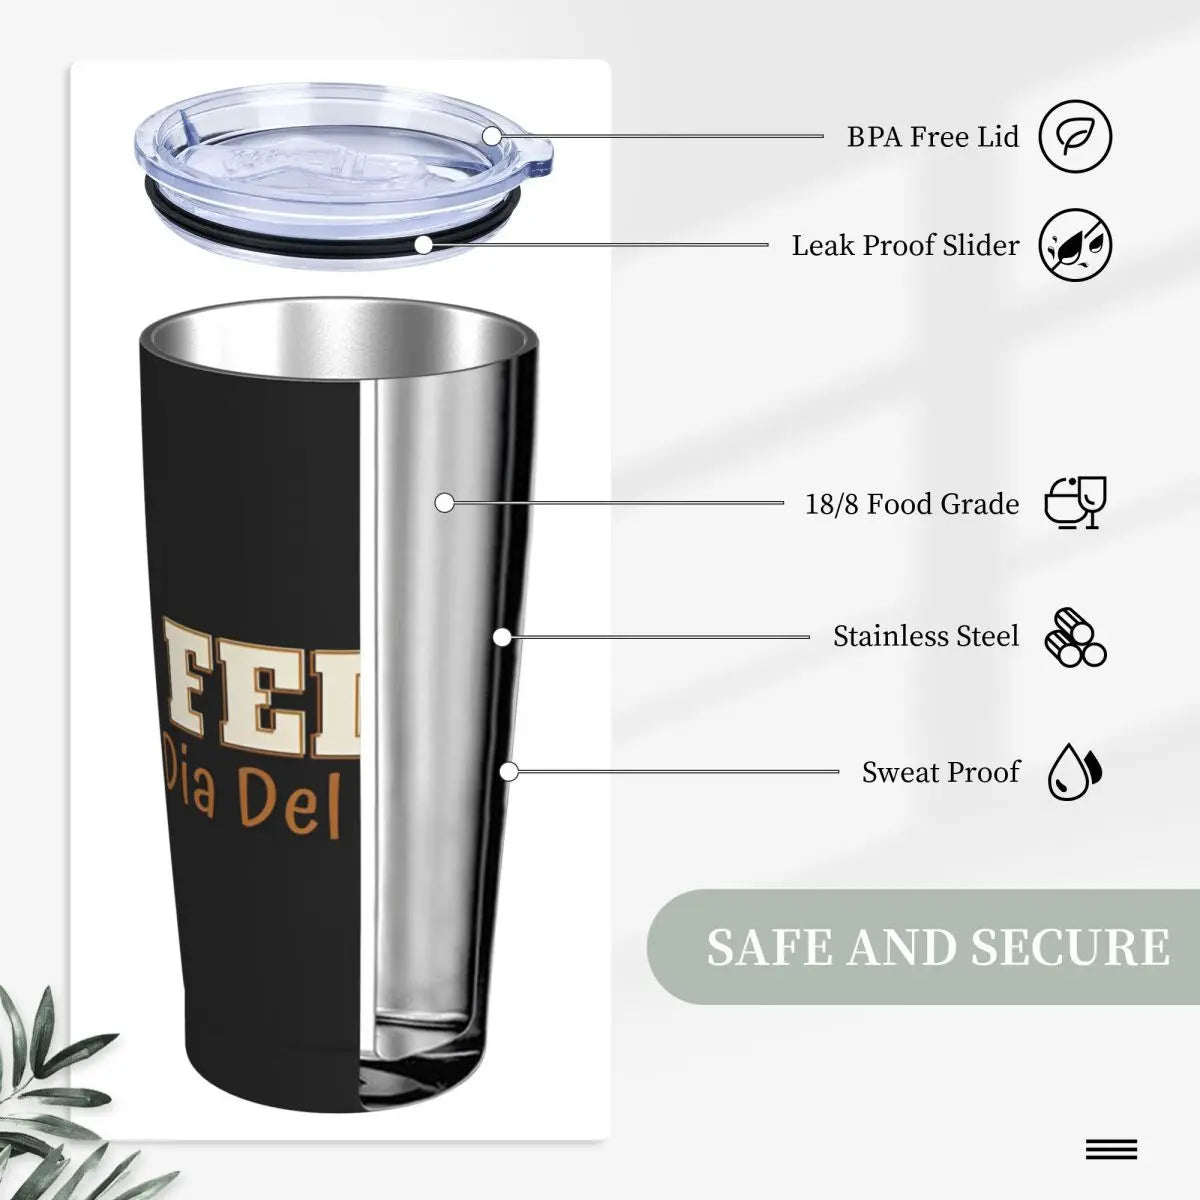 Feliz Dia Del Padre Mi Amor Stainless Steel Tumbler Father Day Thermal Mug With Straws and Lid Large Car Mugs Drink Water Bottle